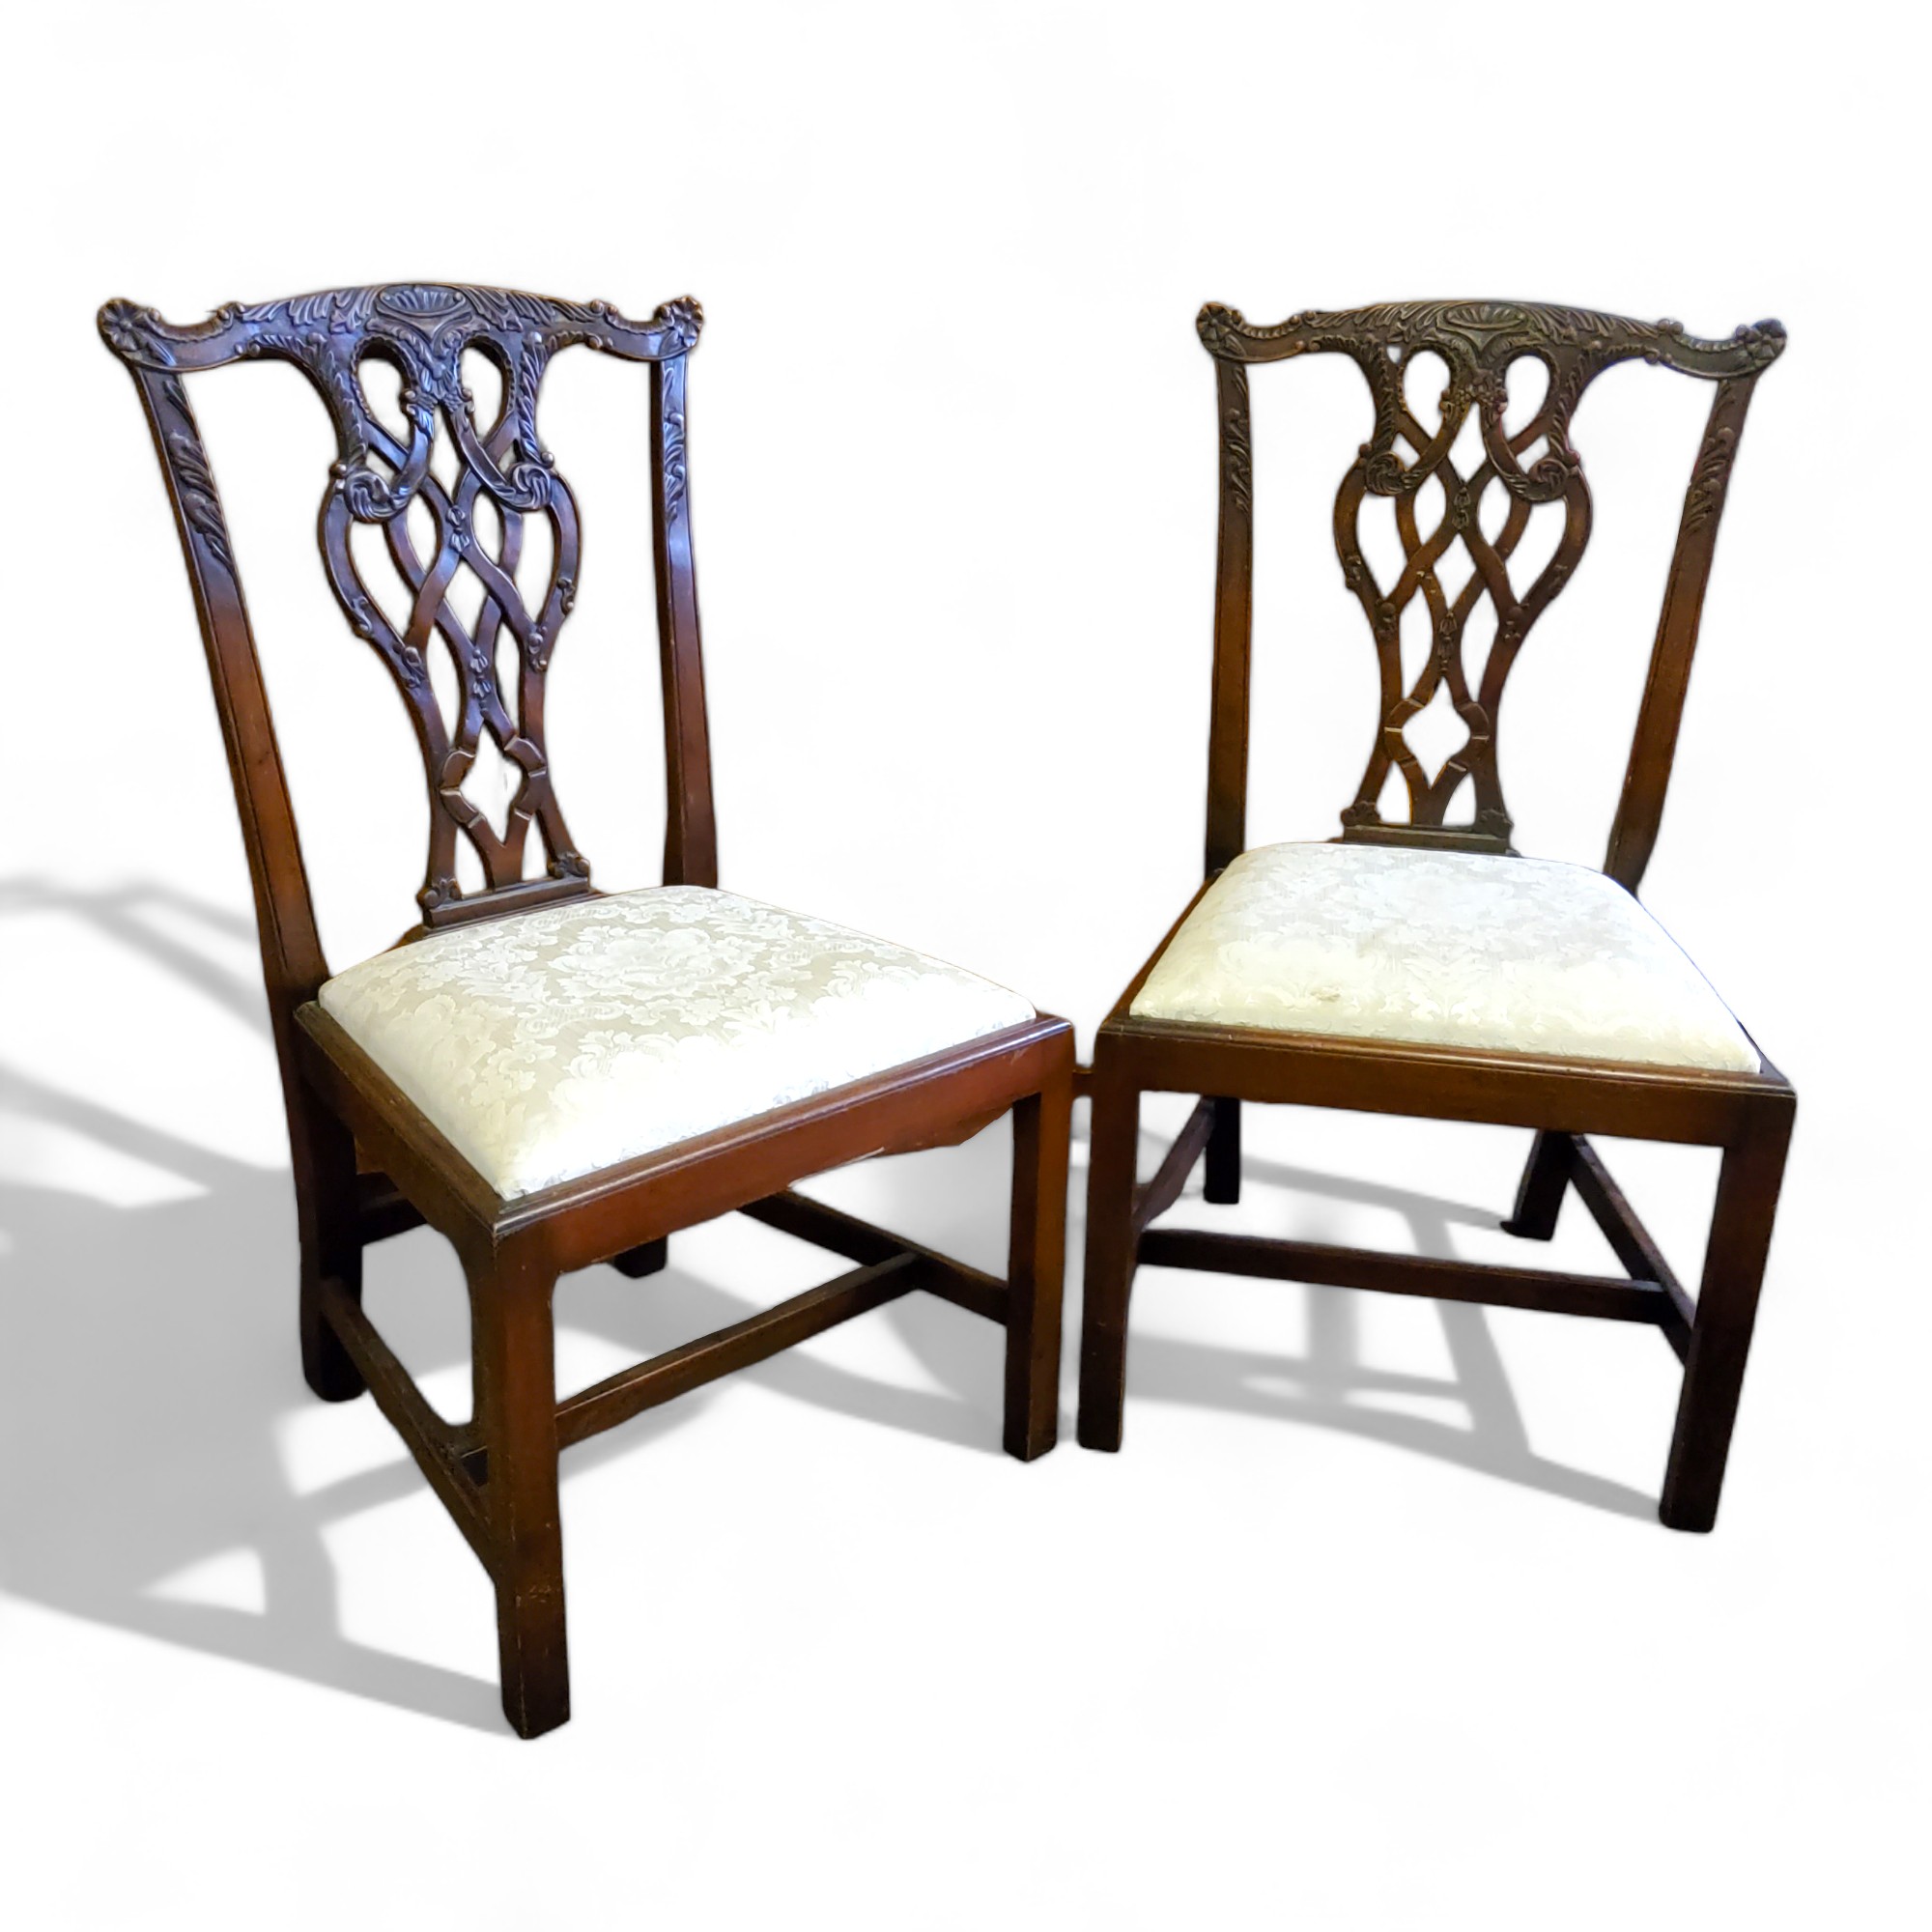 A pair of Chippendale Revival open hall chairs, profusely carved pierced splat, drop in seat, H-